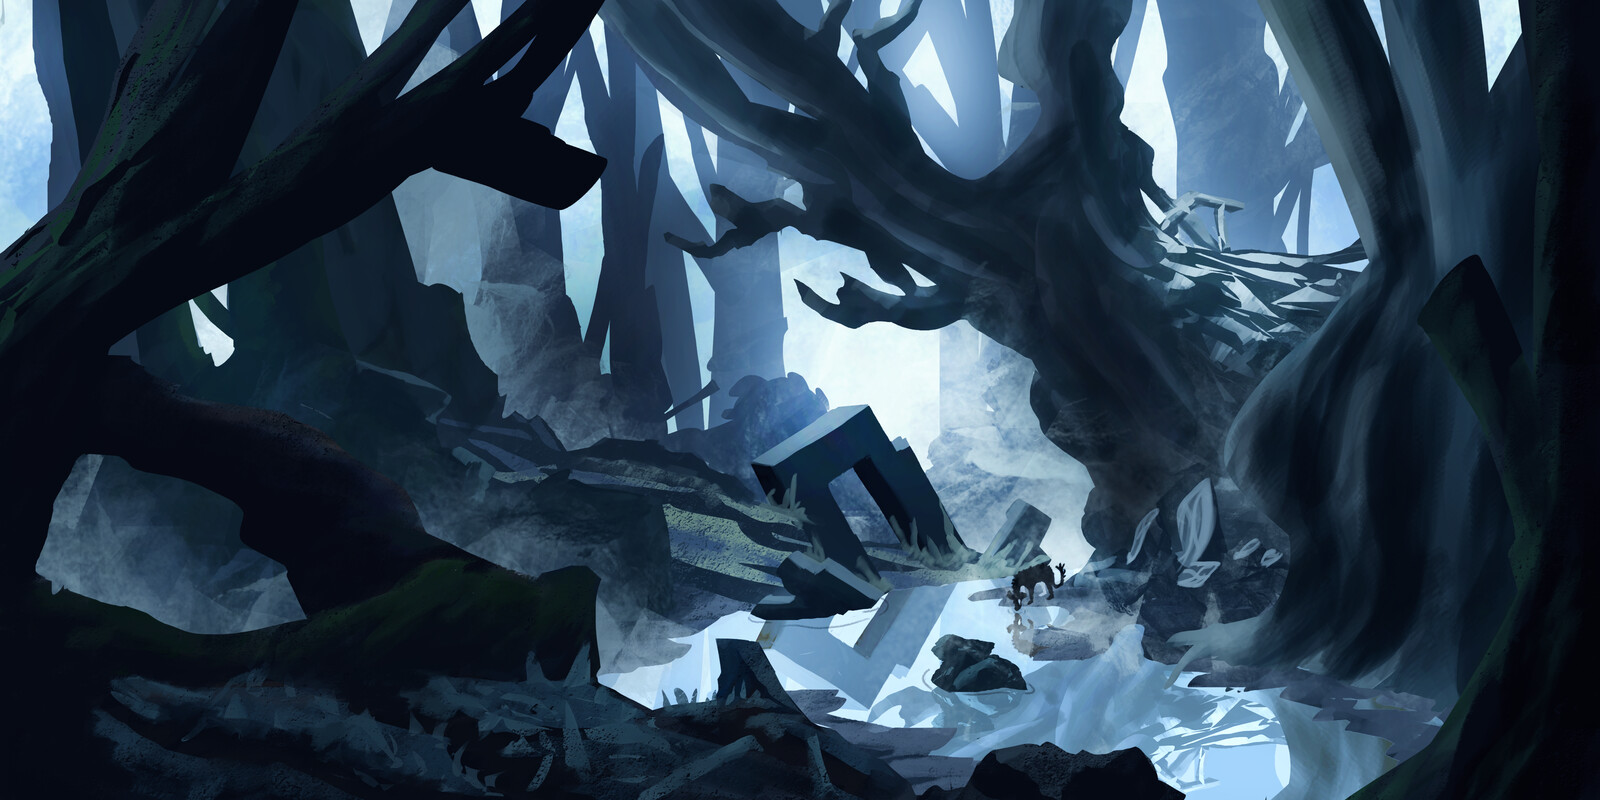 2D Concept Art - Into the woods (Shadows of a Sunless World)